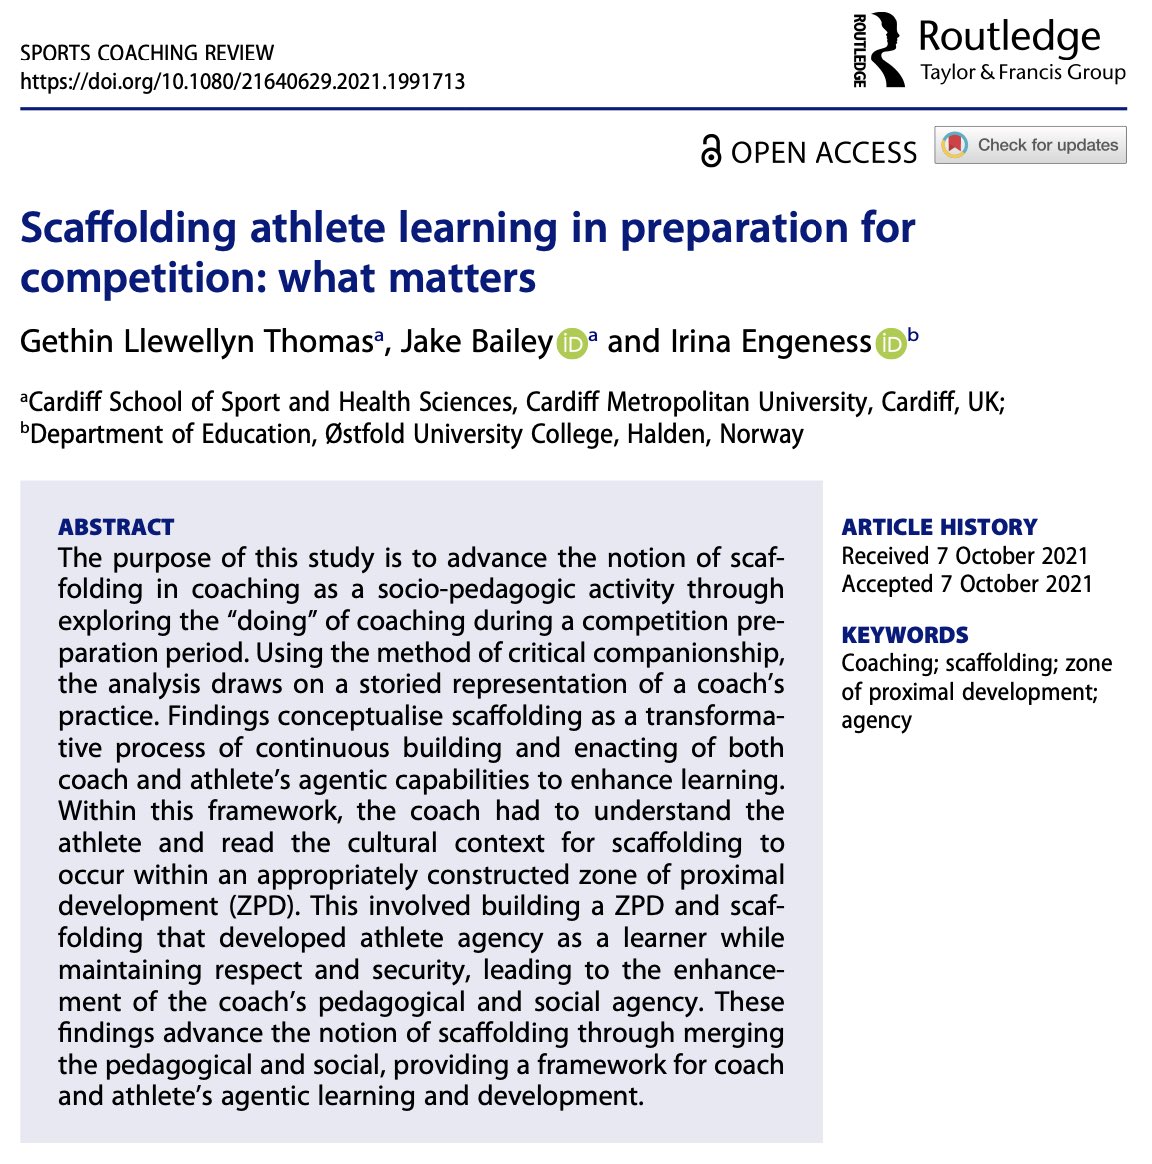 ‘Scaffolding athlete learning in preparation for competition: what matters’ @gethllew10, Jake Bailey (@TheCoaching_Hub) and @IEngeness’ (@hiofnorge) paper is available open access @tandfsport doi.org/10.1080/216406…